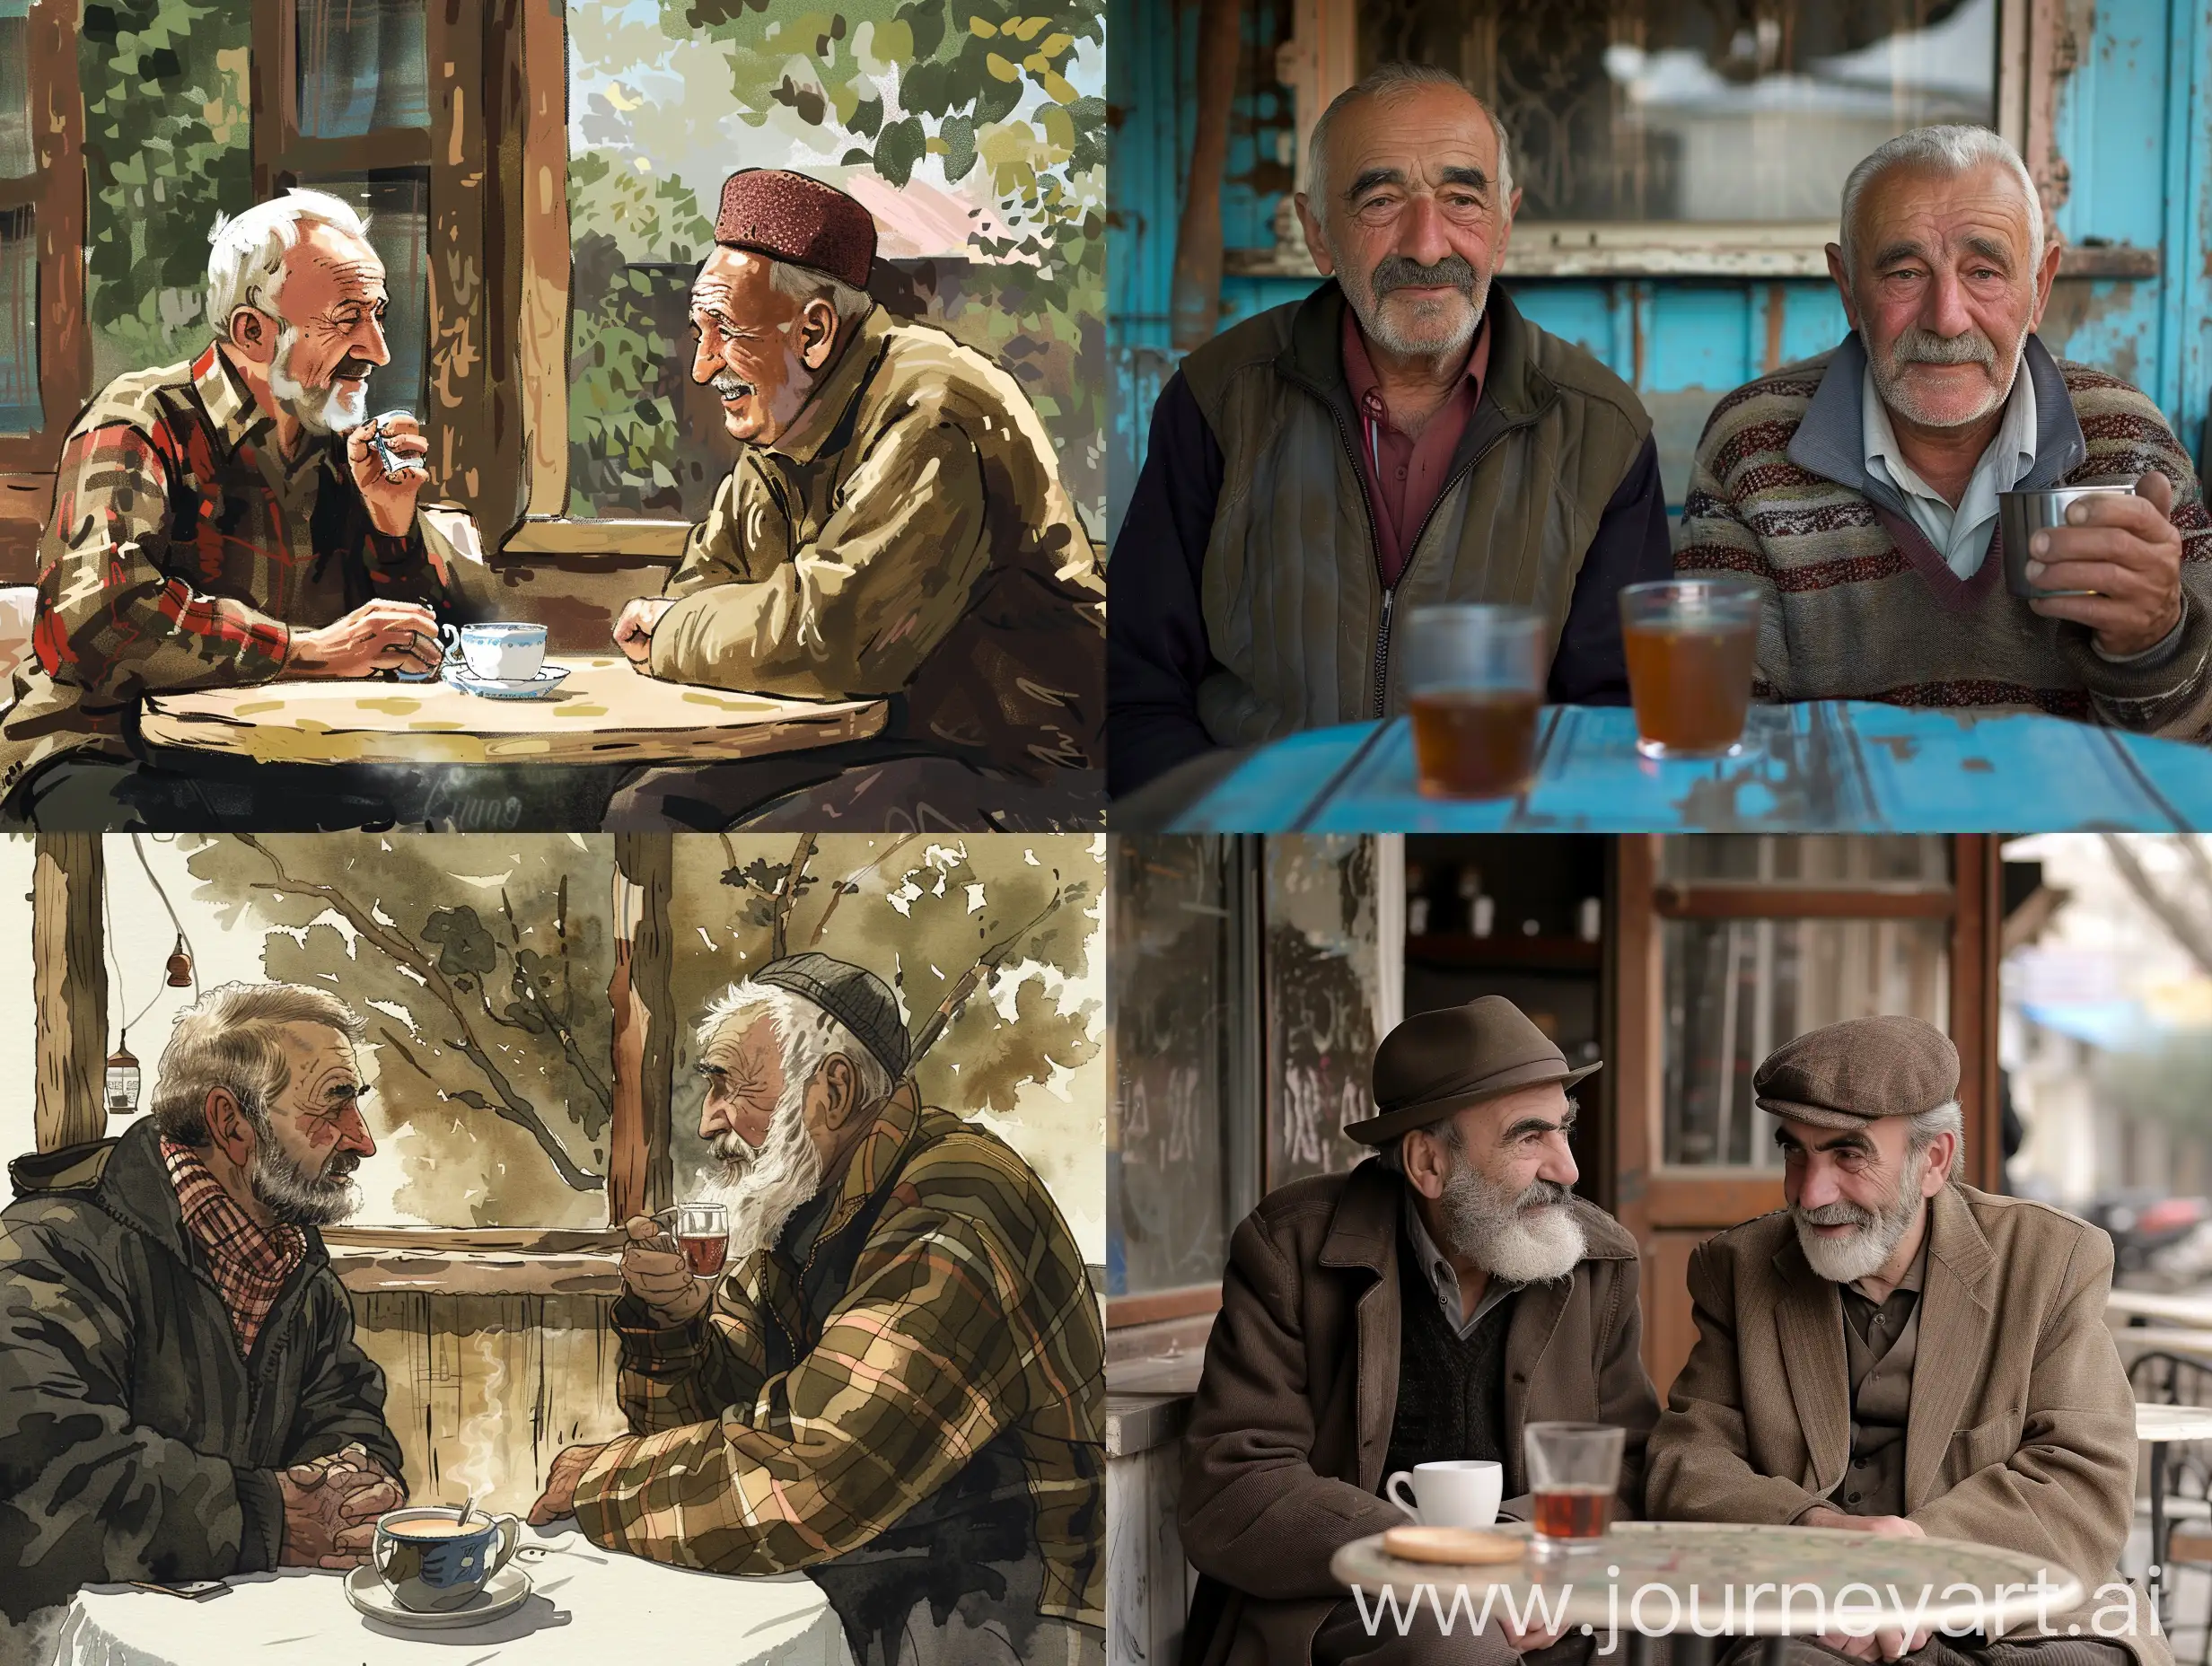 Mehmet and Kemal were sitting in the village café, sipping tea. Kemal turned to Mehmet with a sigh and said, "Have you seen what they have done to our country, Mehmet?"

Mehmet took a deep breath and replied, "I have, Kemal, but don't forget that we will rise again thanks to honest people."

Kemal's eyes shone with hope and he added, "If we join hands, we can overcome every difficulty."

Mehmet smiled and took another sip of his tea and said, "The important thing is not to lose faith and to fight together."

Kemal nodded and said, "You are right, Mehmet. The future depends on our efforts," he replied.